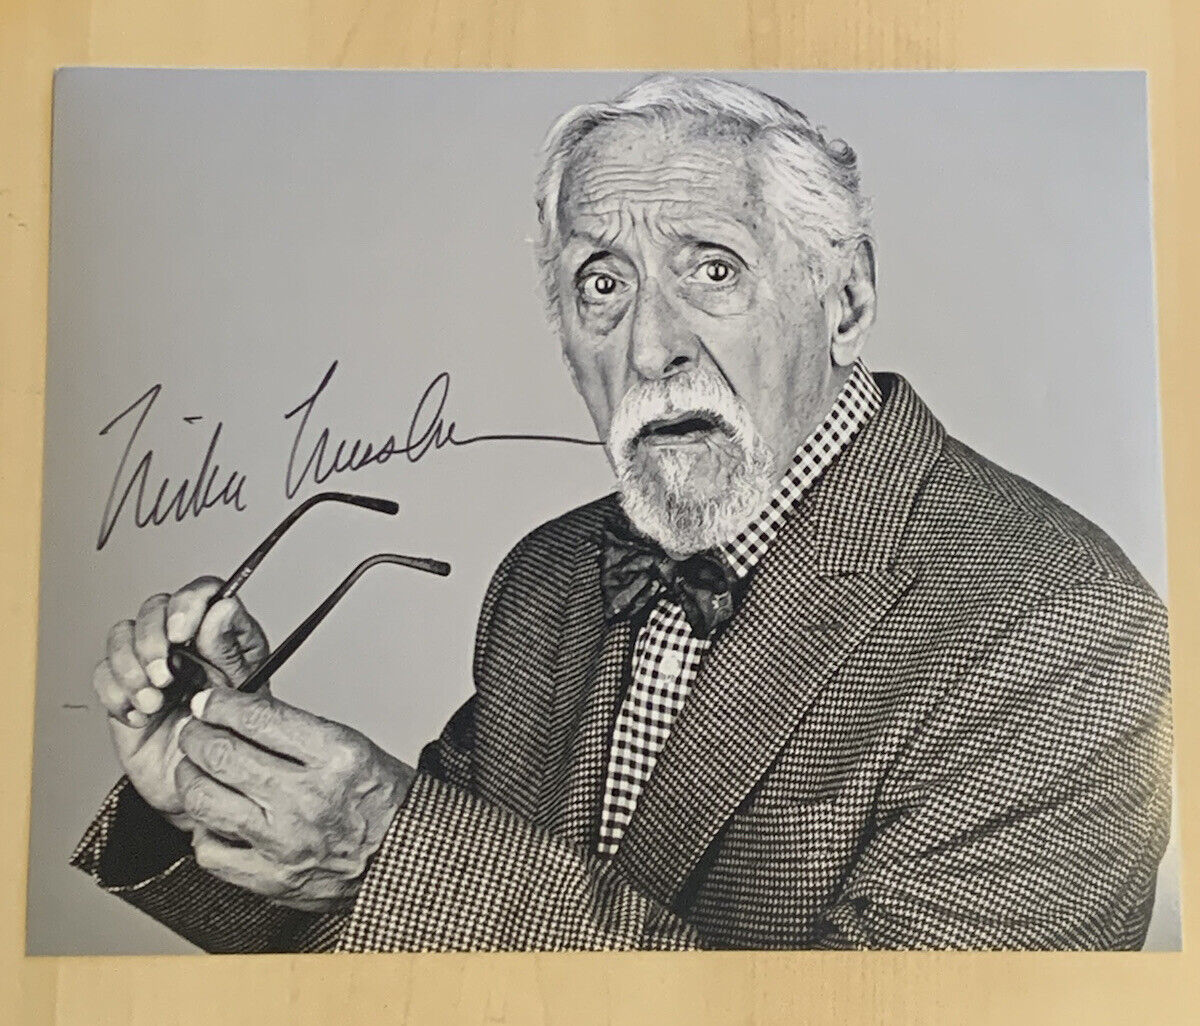 MIKE NUSSBAUM HAND SIGNED 8x10 Photo Poster painting HOUSE OF GAMES ACTOR AUTOGRAPHED RARE COA